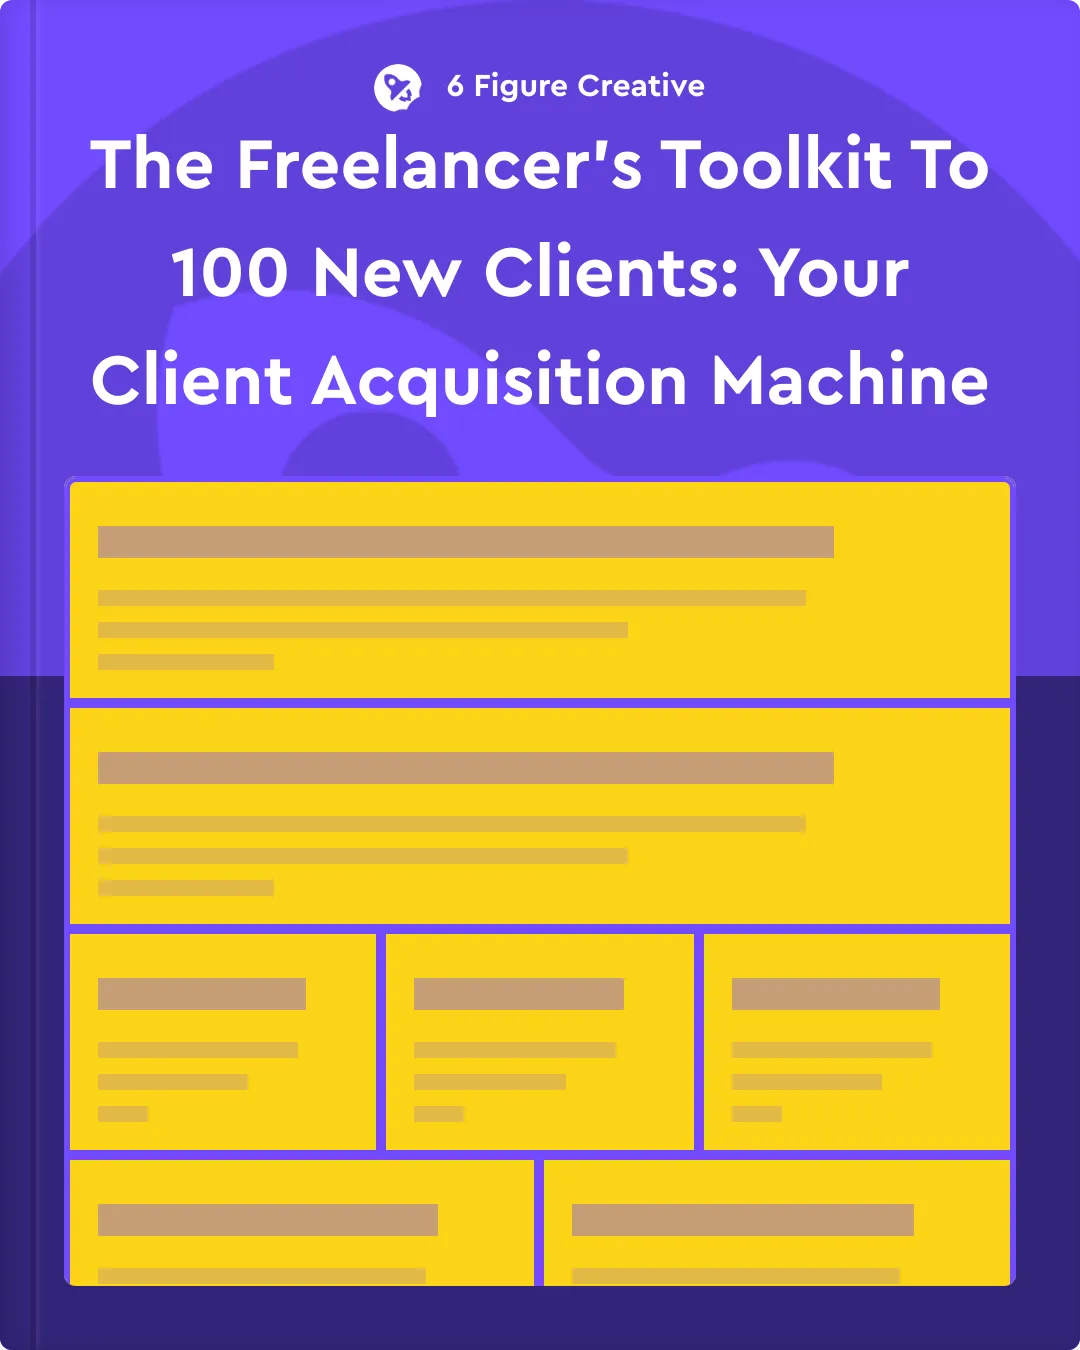 The Freelancer's Toolkit to 100 New Clients: Your Client Acquisition Machine